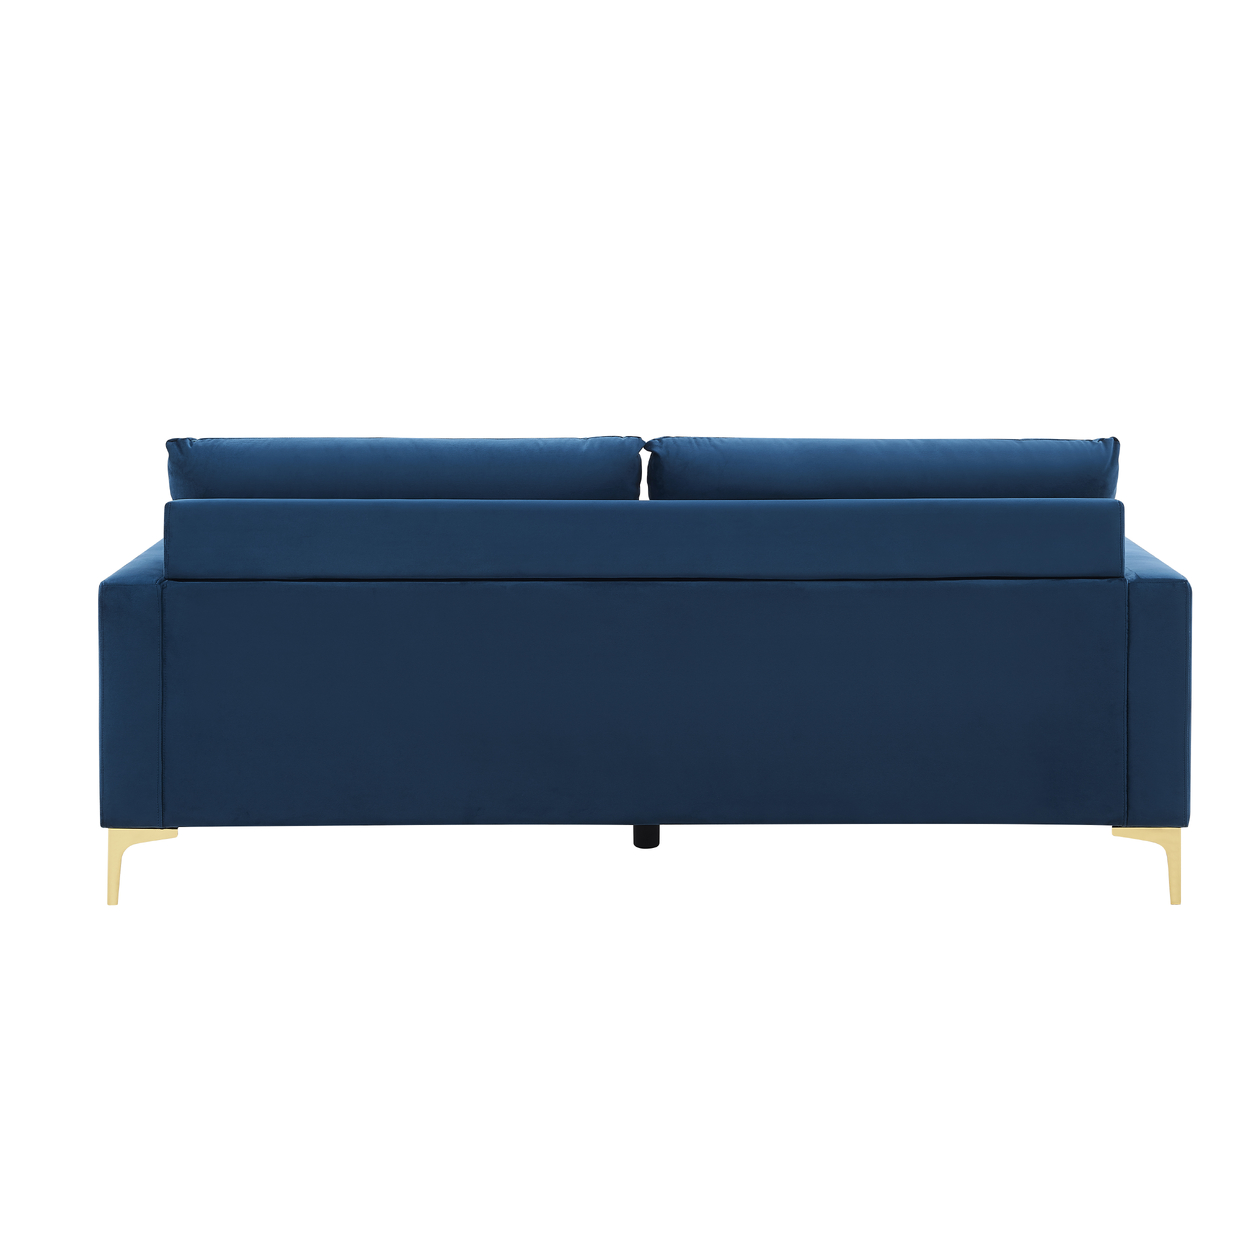 Iconic Home Roxi Sofa Velvet Upholstered Multi-Cushion Seat Gold Tone Metal Y-Legs With 2 Decorative Pillows - Blue